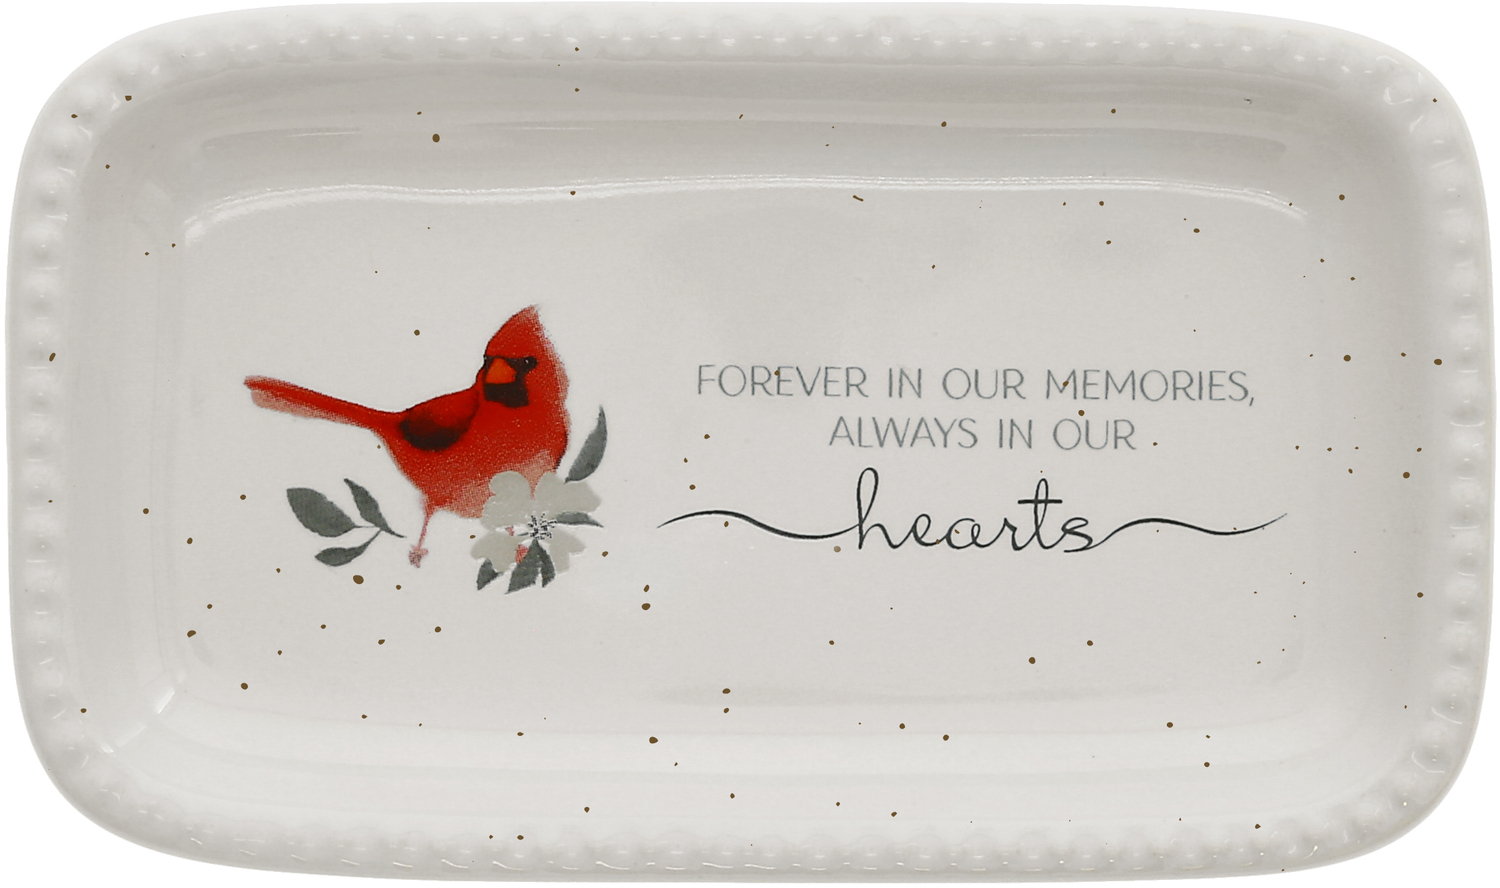 In Our Hearts by Always by Your Side - In Our Hearts - 5" x 3" Keepsake Dish